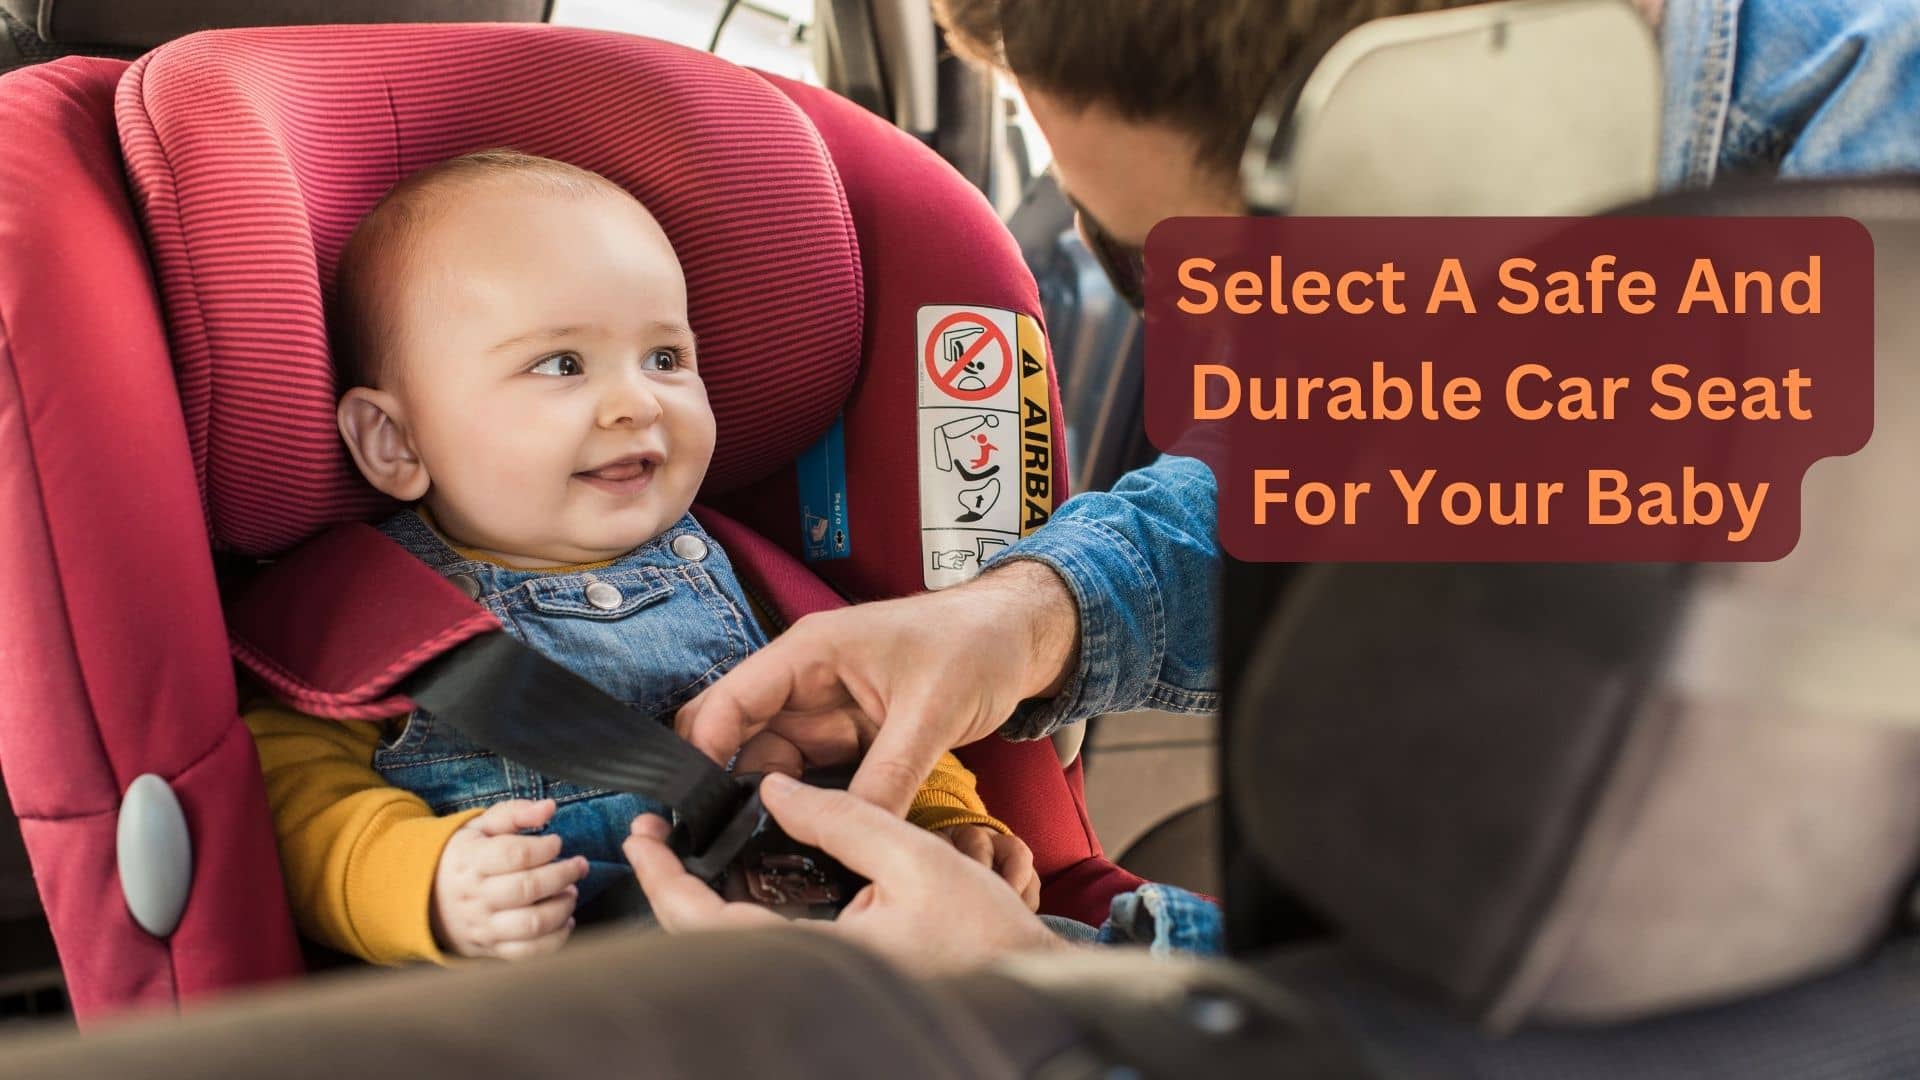 How To Select A Safe And Durable Car Seat For Baby?